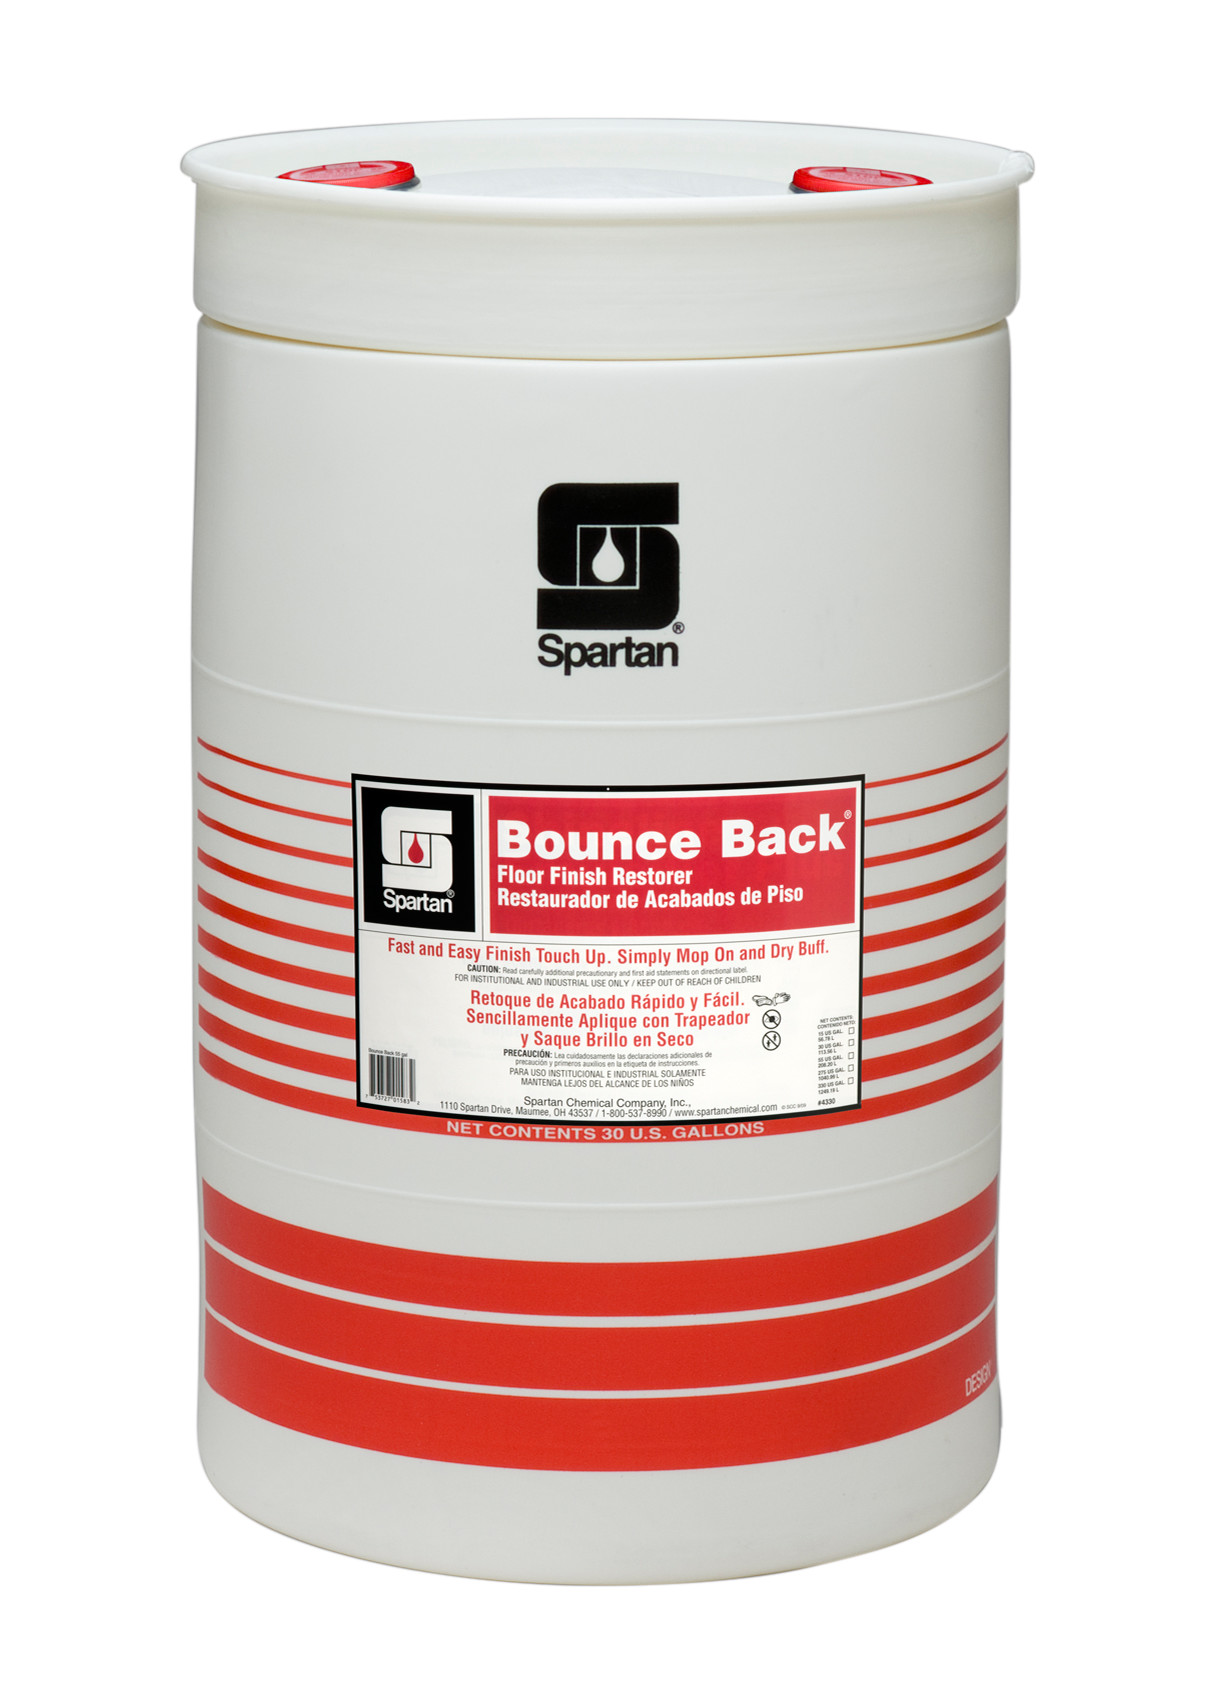 Spartan Chemical Company Bounce Back, 30 GAL DRUM